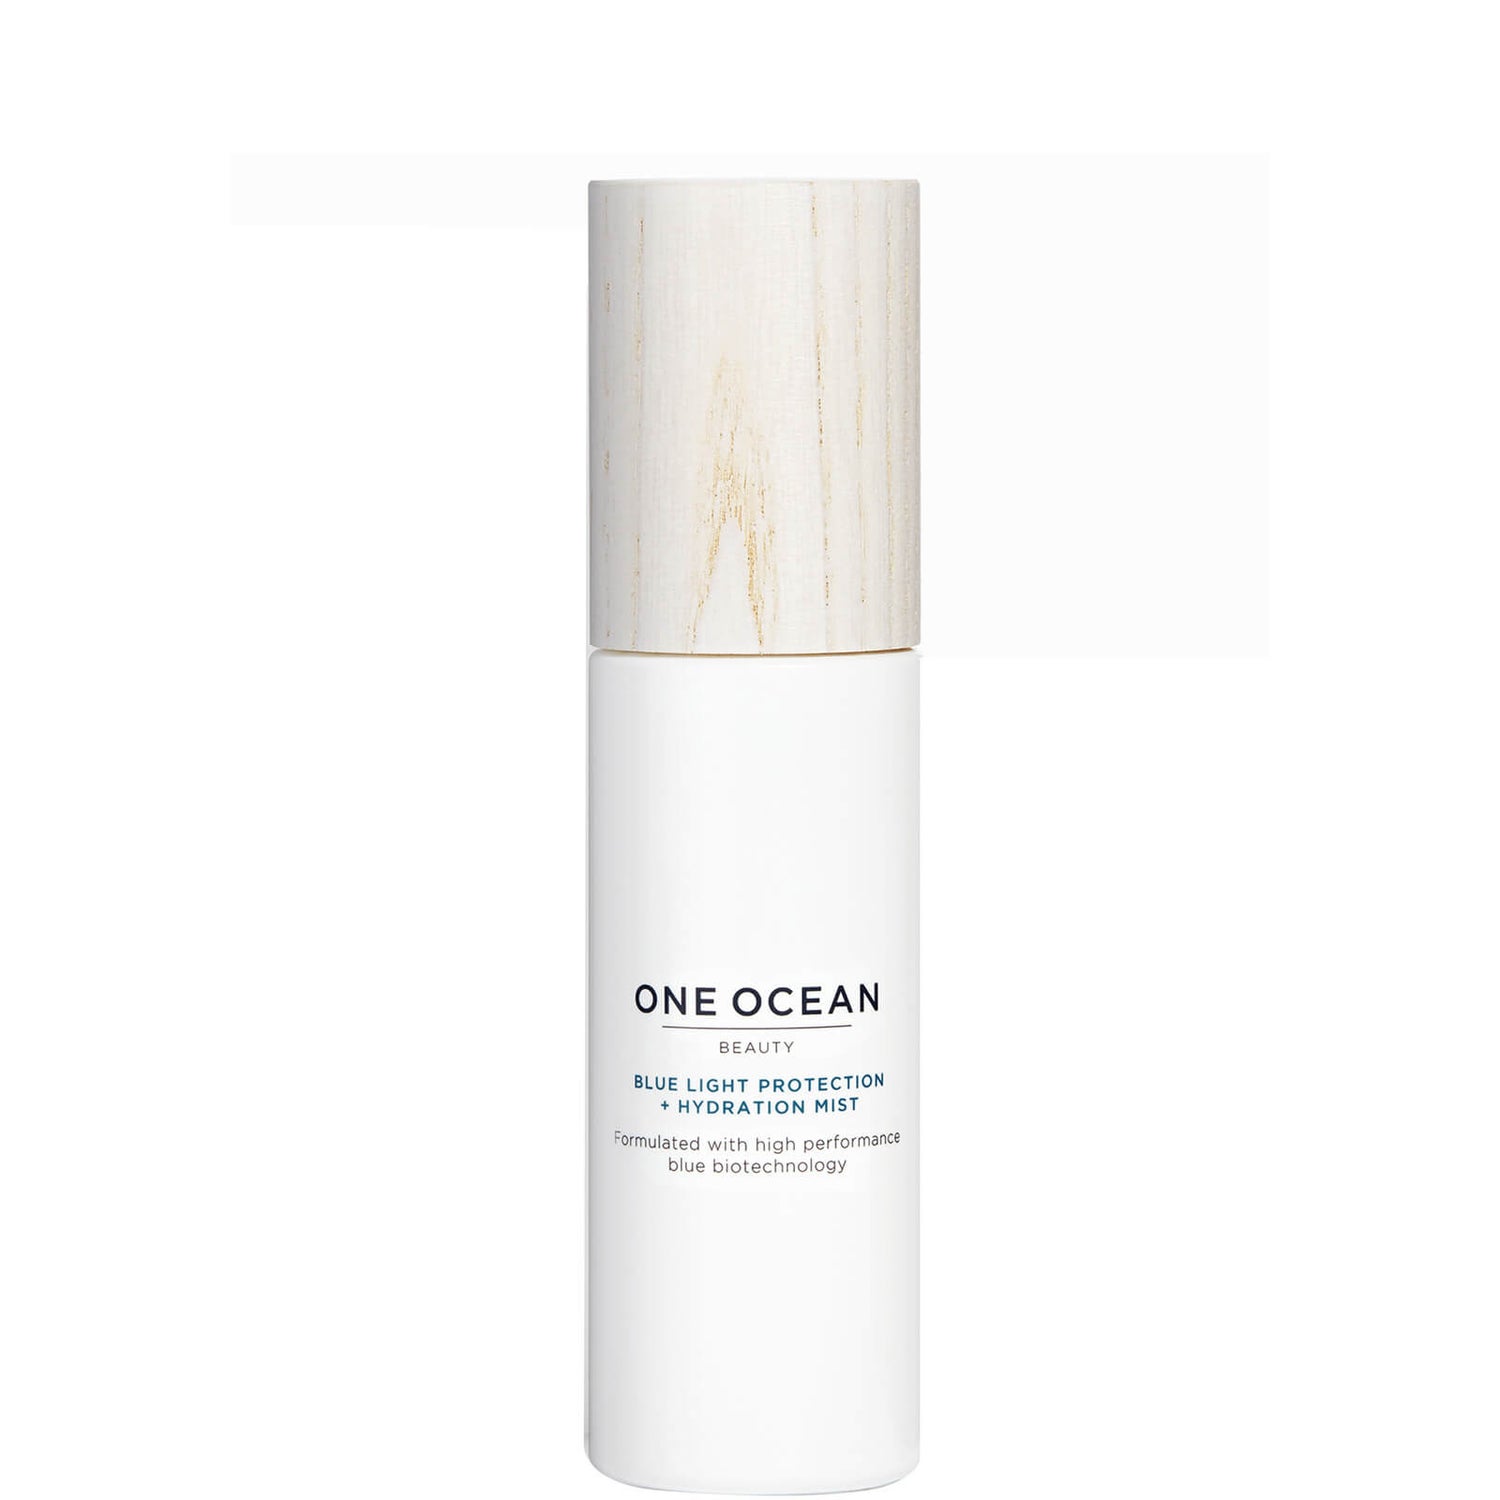 One Ocean Beauty Blue Light Protection and Hydration Mist